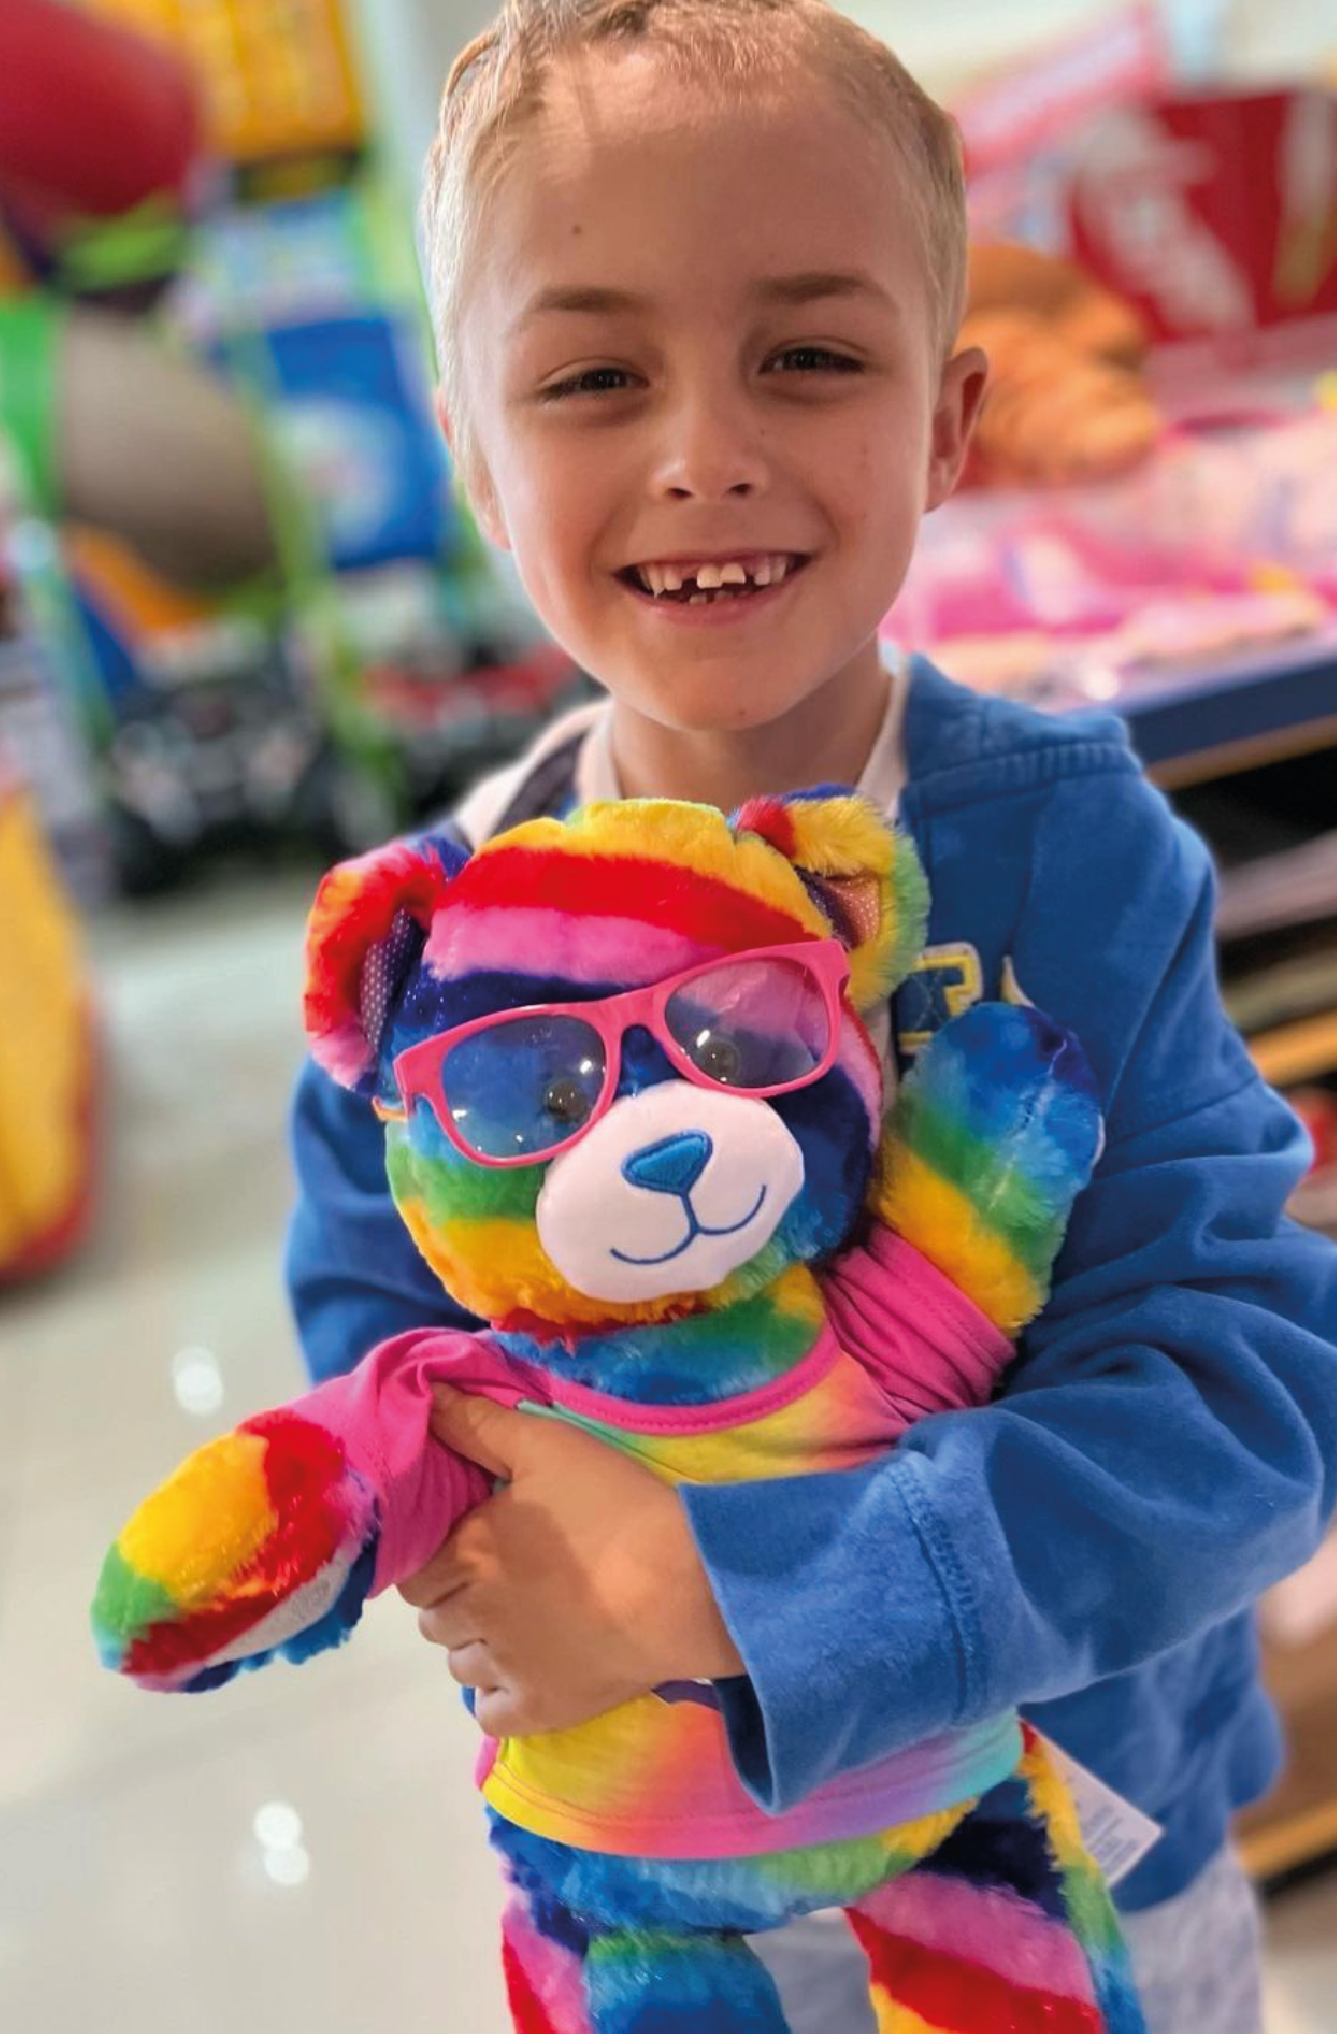 Hunter Emms pictured with a rainbow teddy bear, this is the boy you're supporting when you purchase a Dear Hunter print in our shop